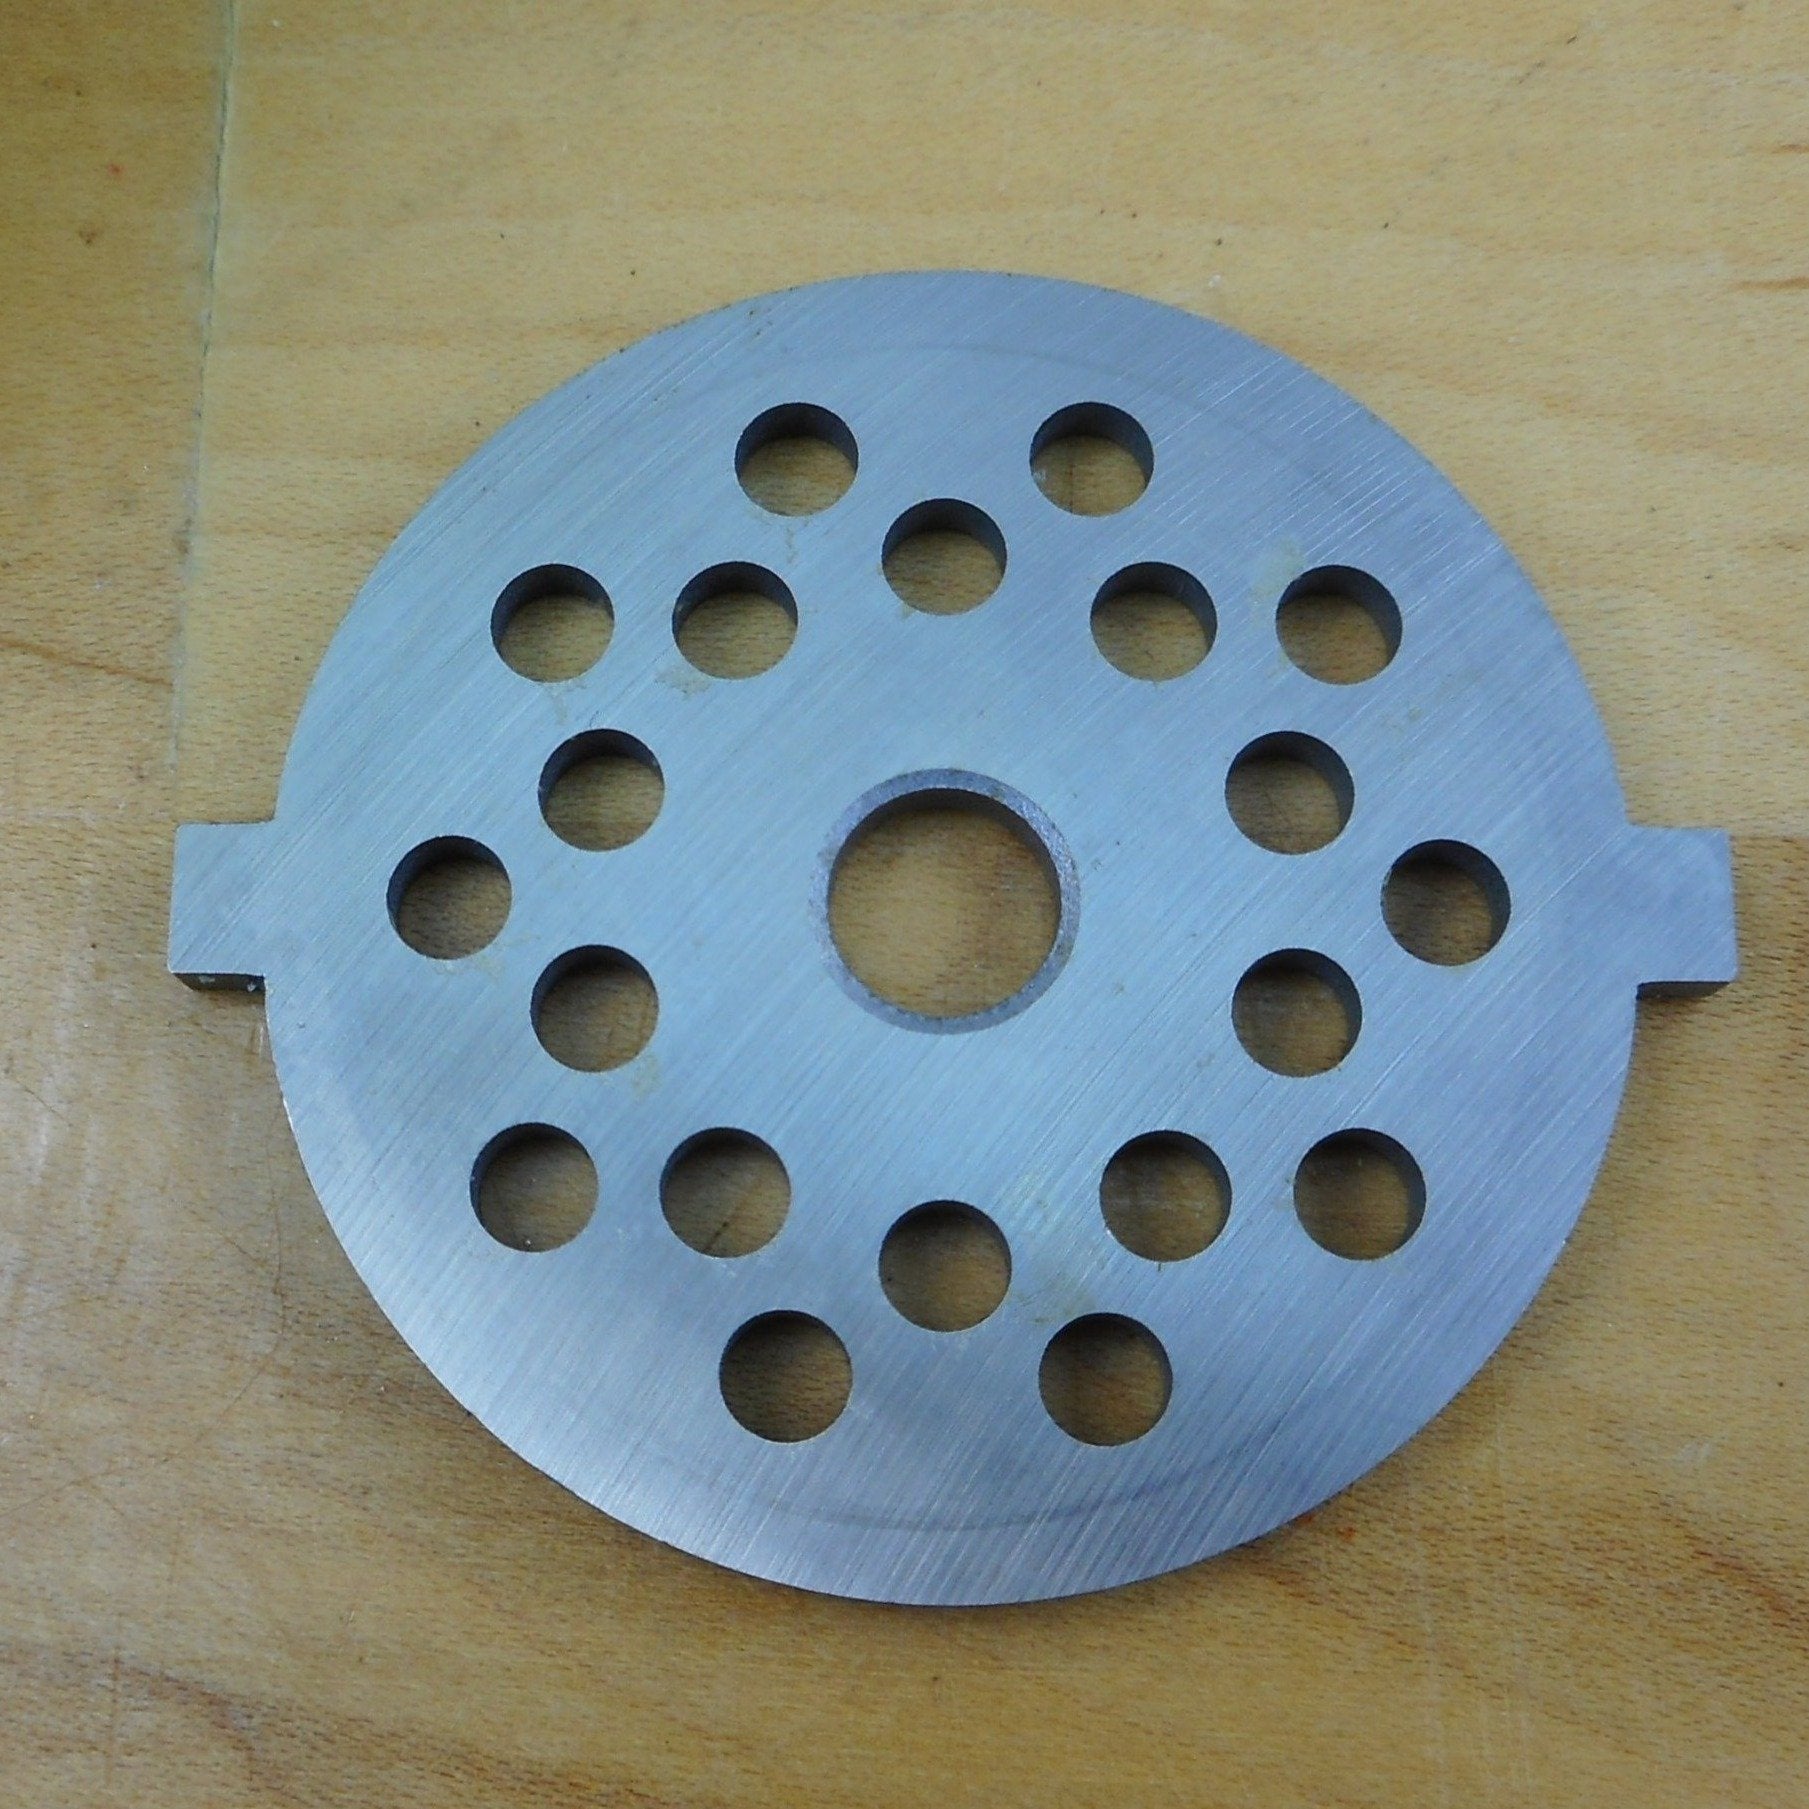 KitchenAid Mixer FGA Attachment New Replacement Part - Fine Grinding Plate - Food/Meat Grinder - 